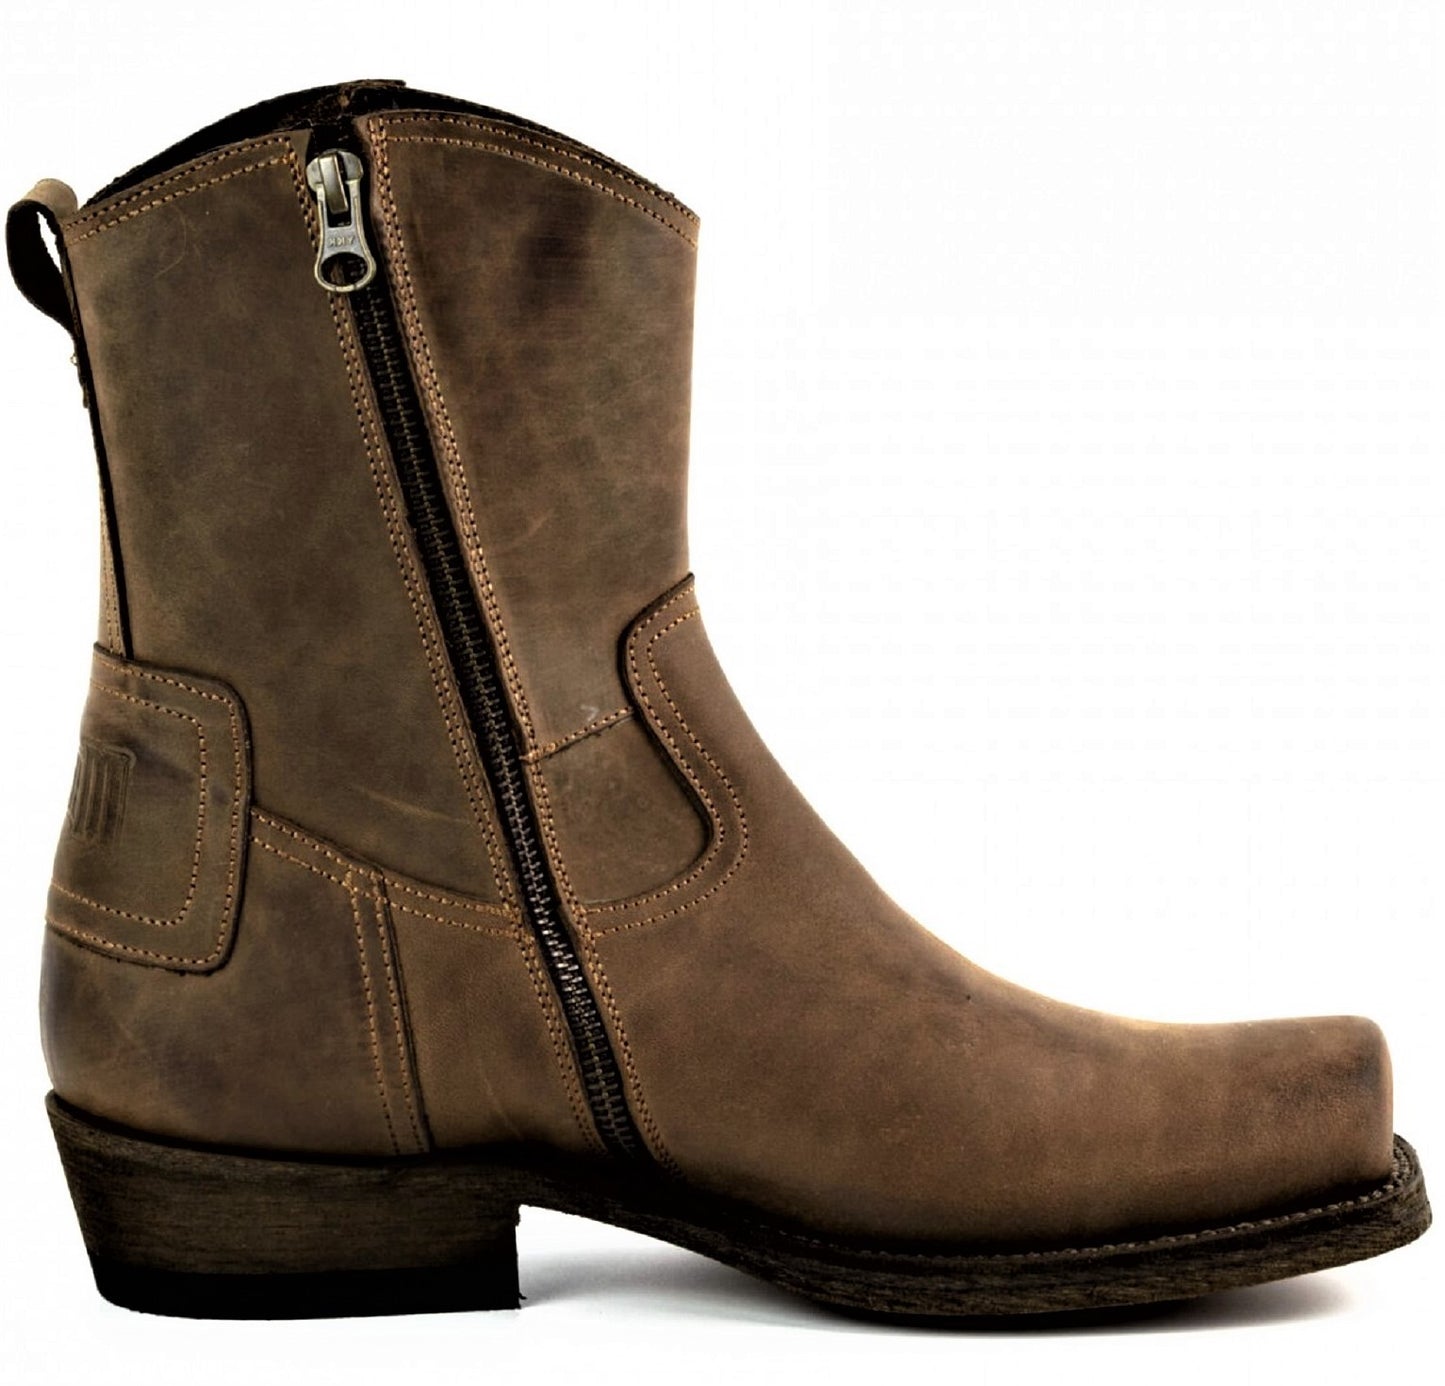 LEATHER ANKLE BOOTS WITH ZIPPER